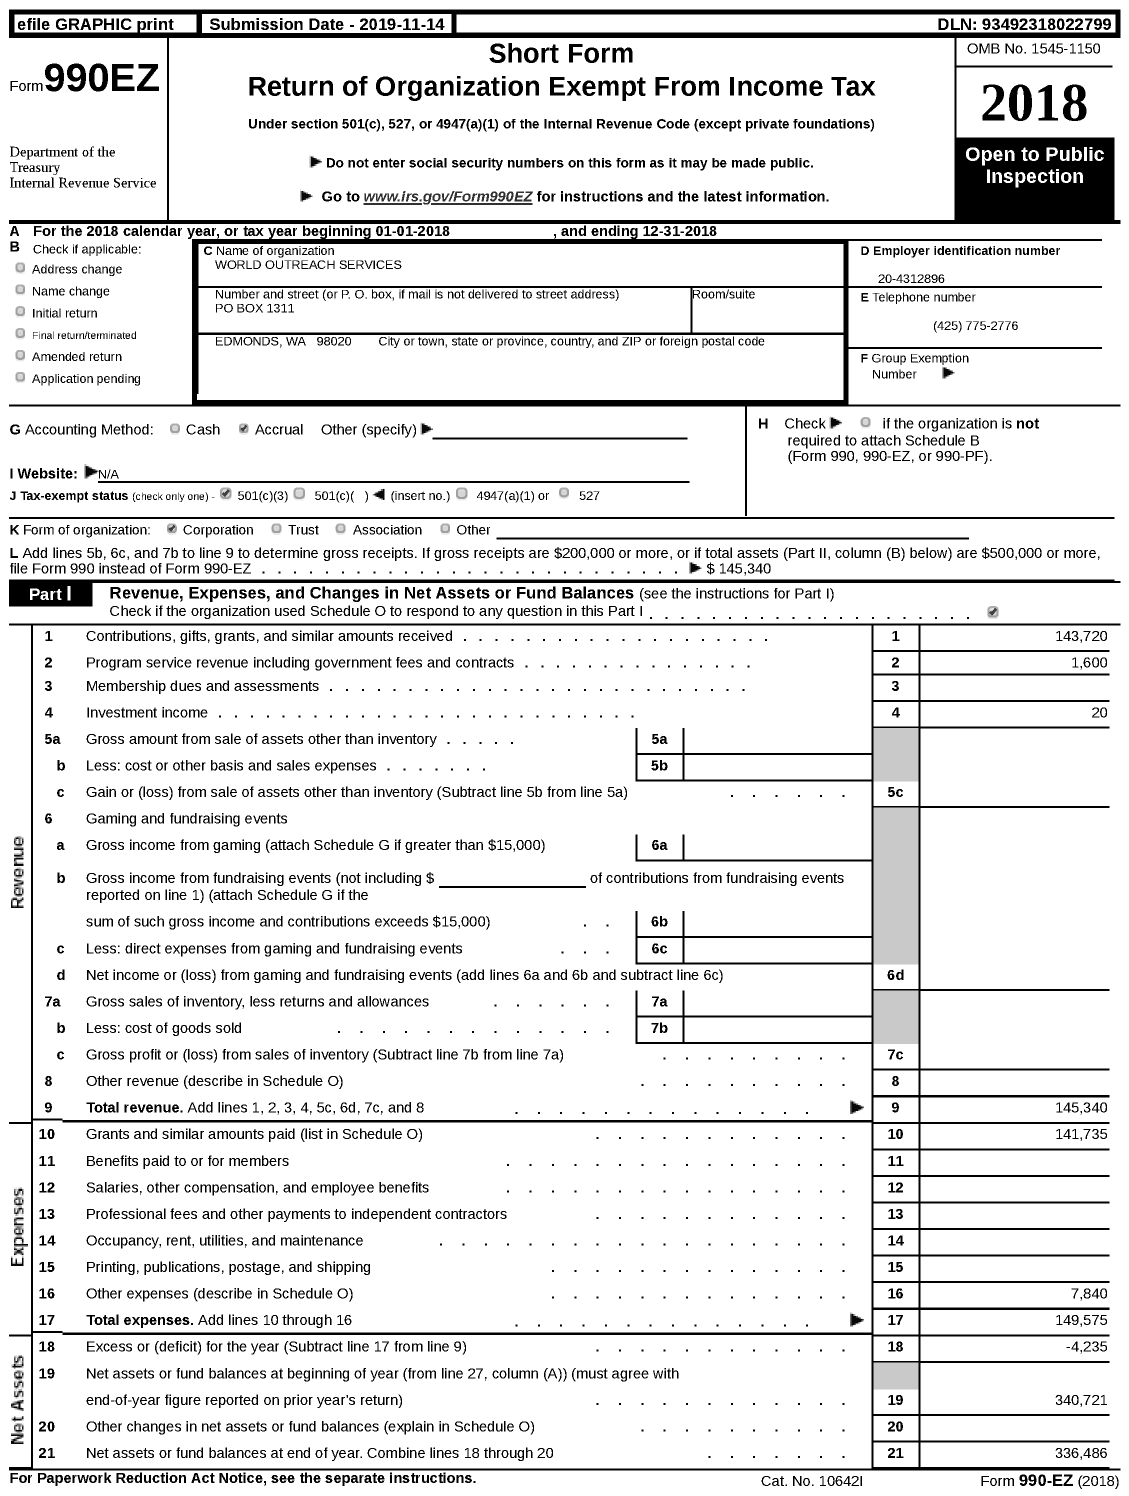 Image of first page of 2018 Form 990EZ for World Outreach Services